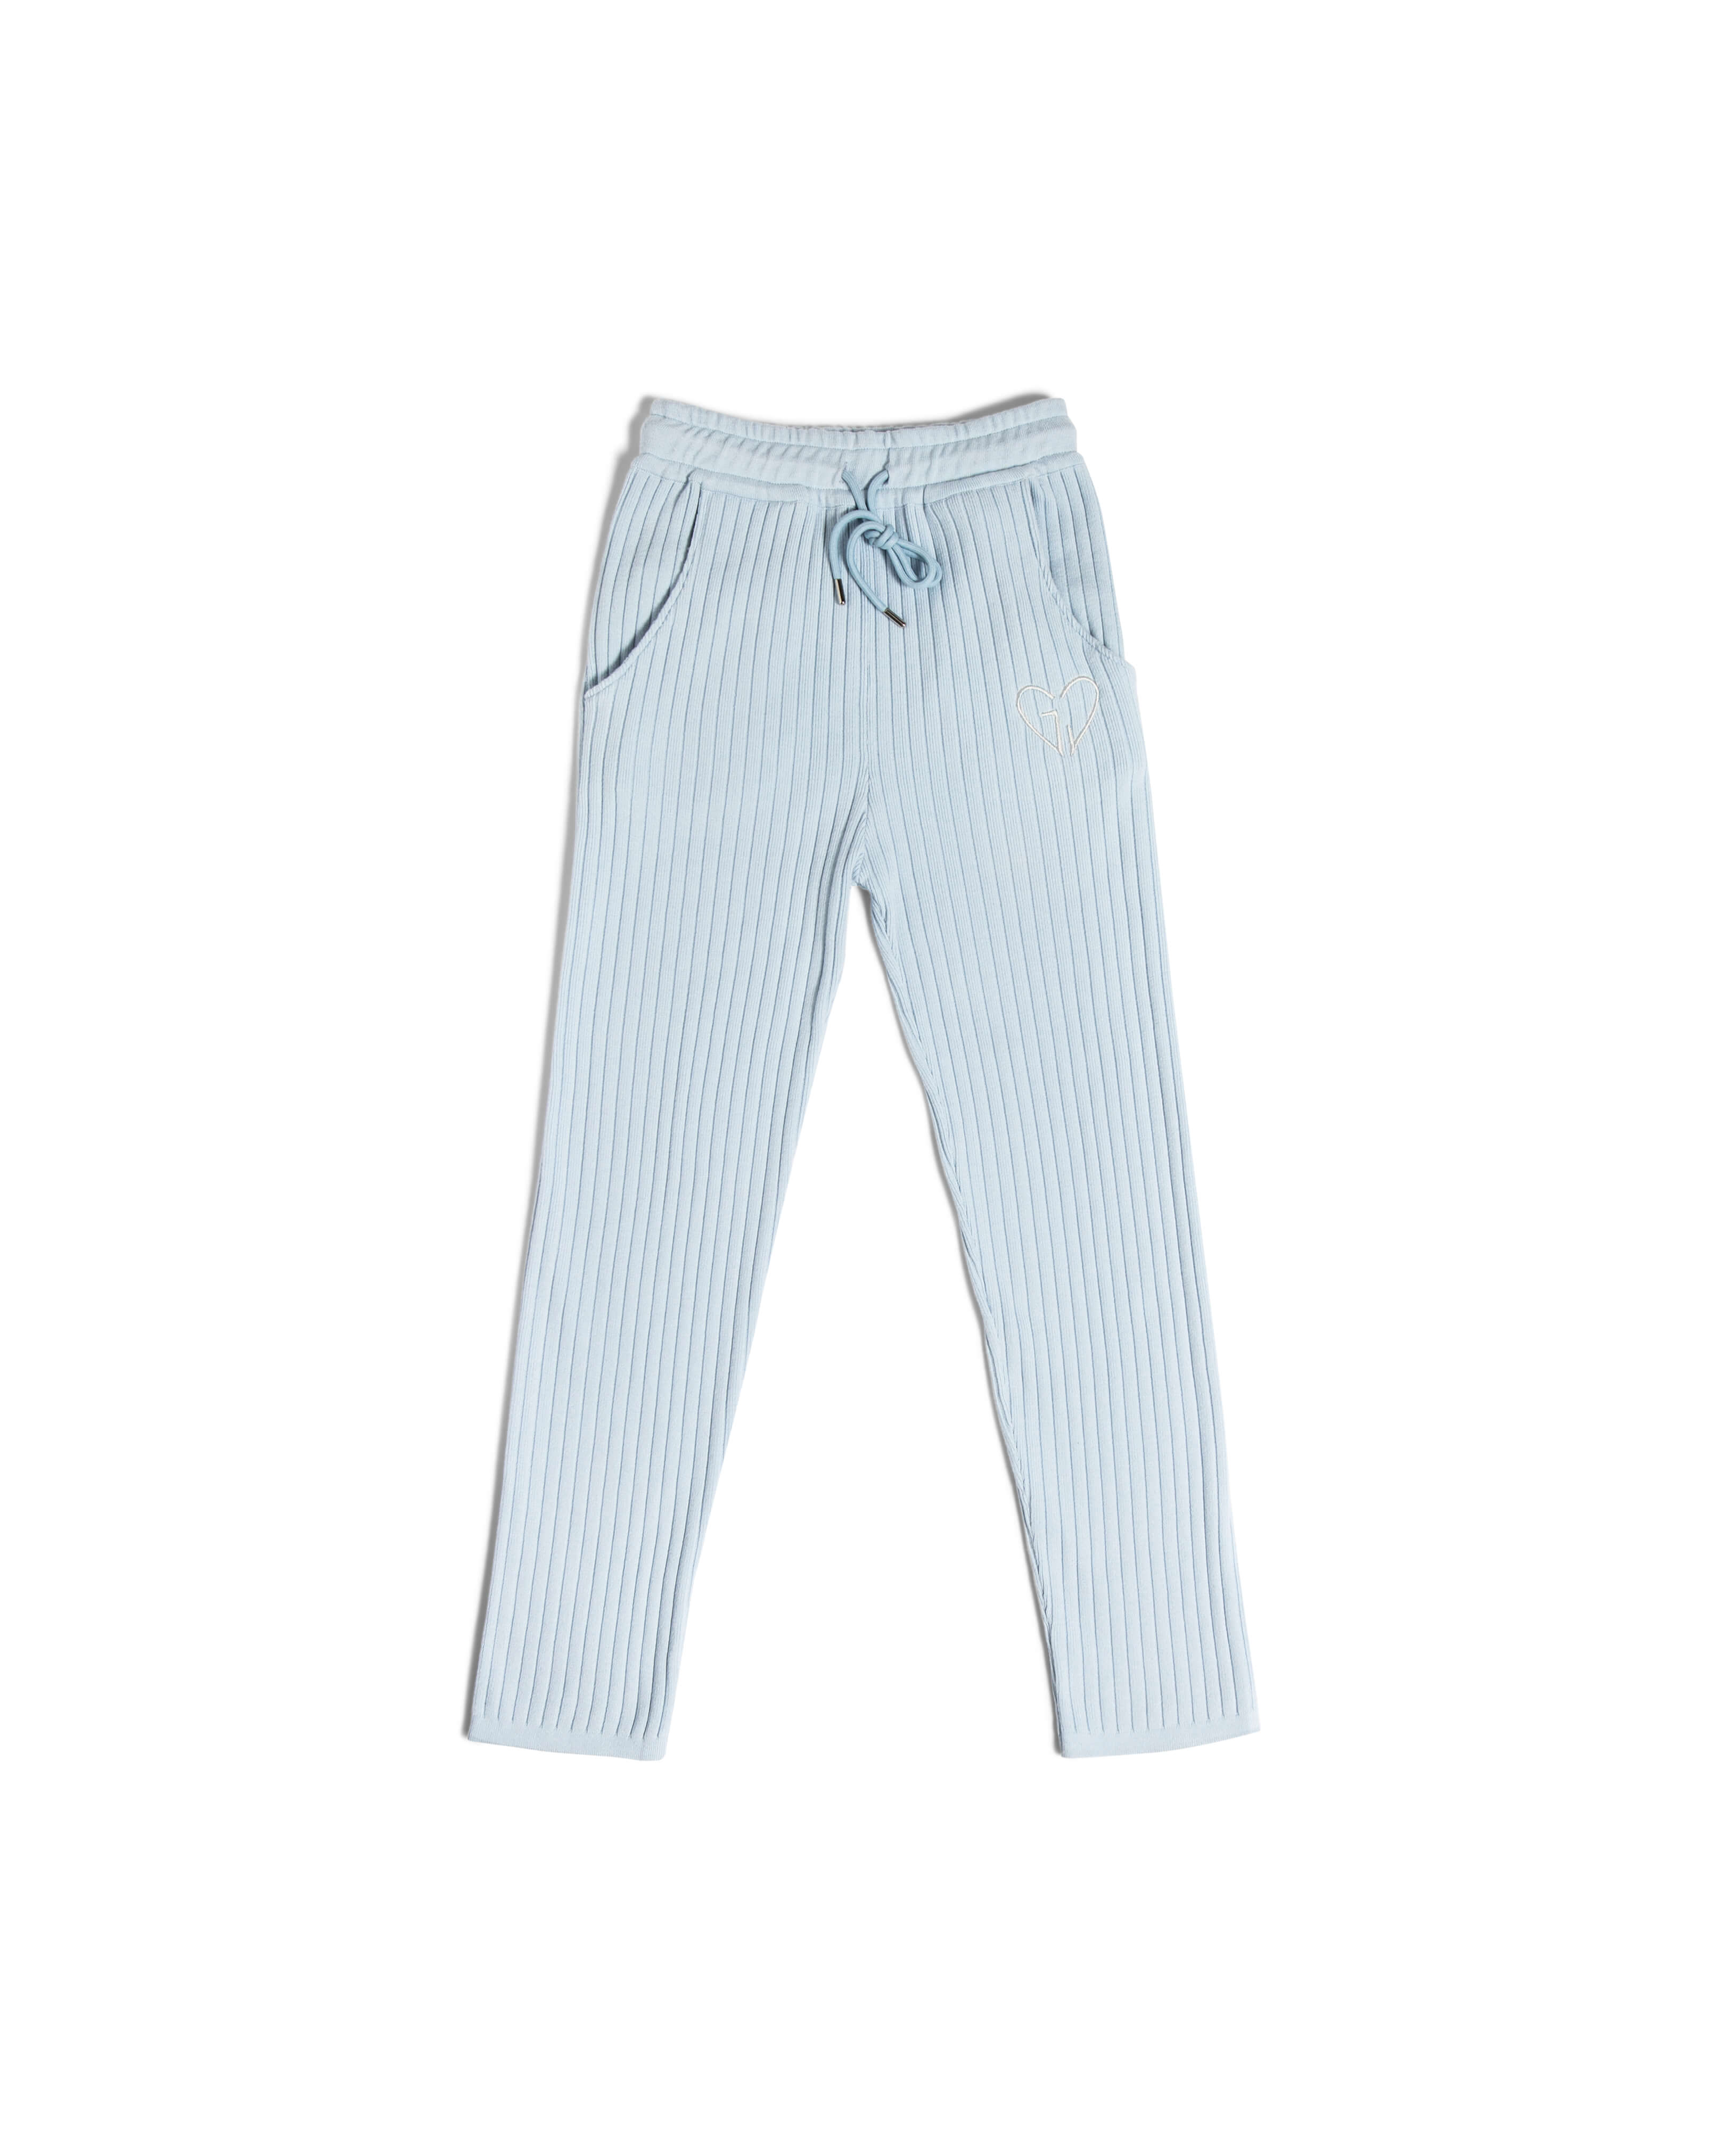 Light Knitted – GRAJO Blue Pants